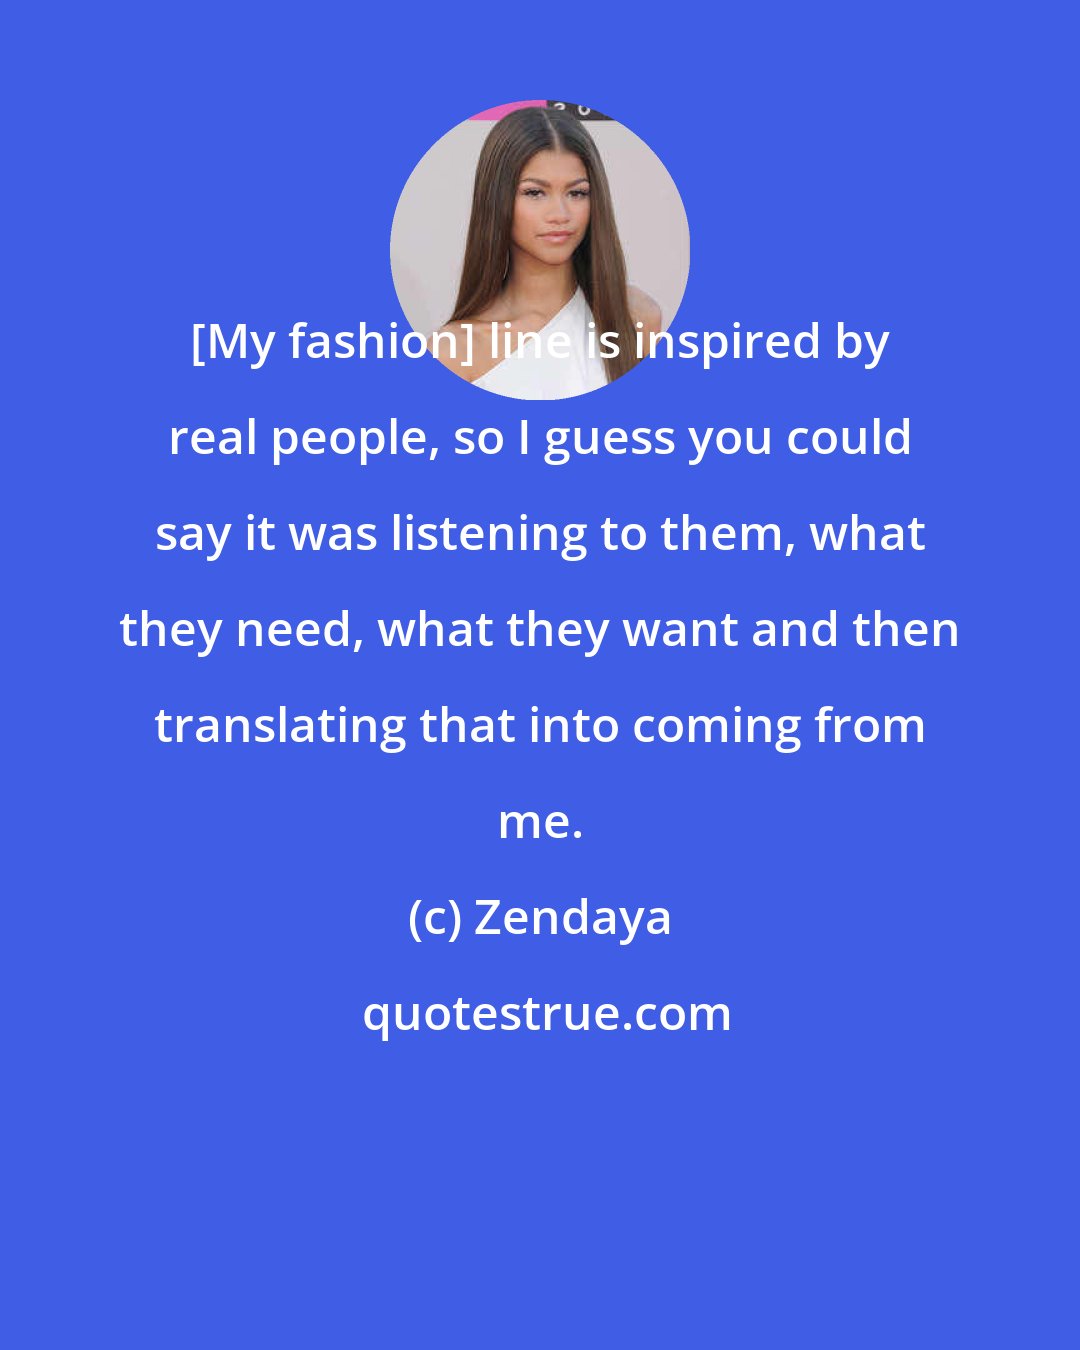 Zendaya: [My fashion] line is inspired by real people, so I guess you could say it was listening to them, what they need, what they want and then translating that into coming from me.